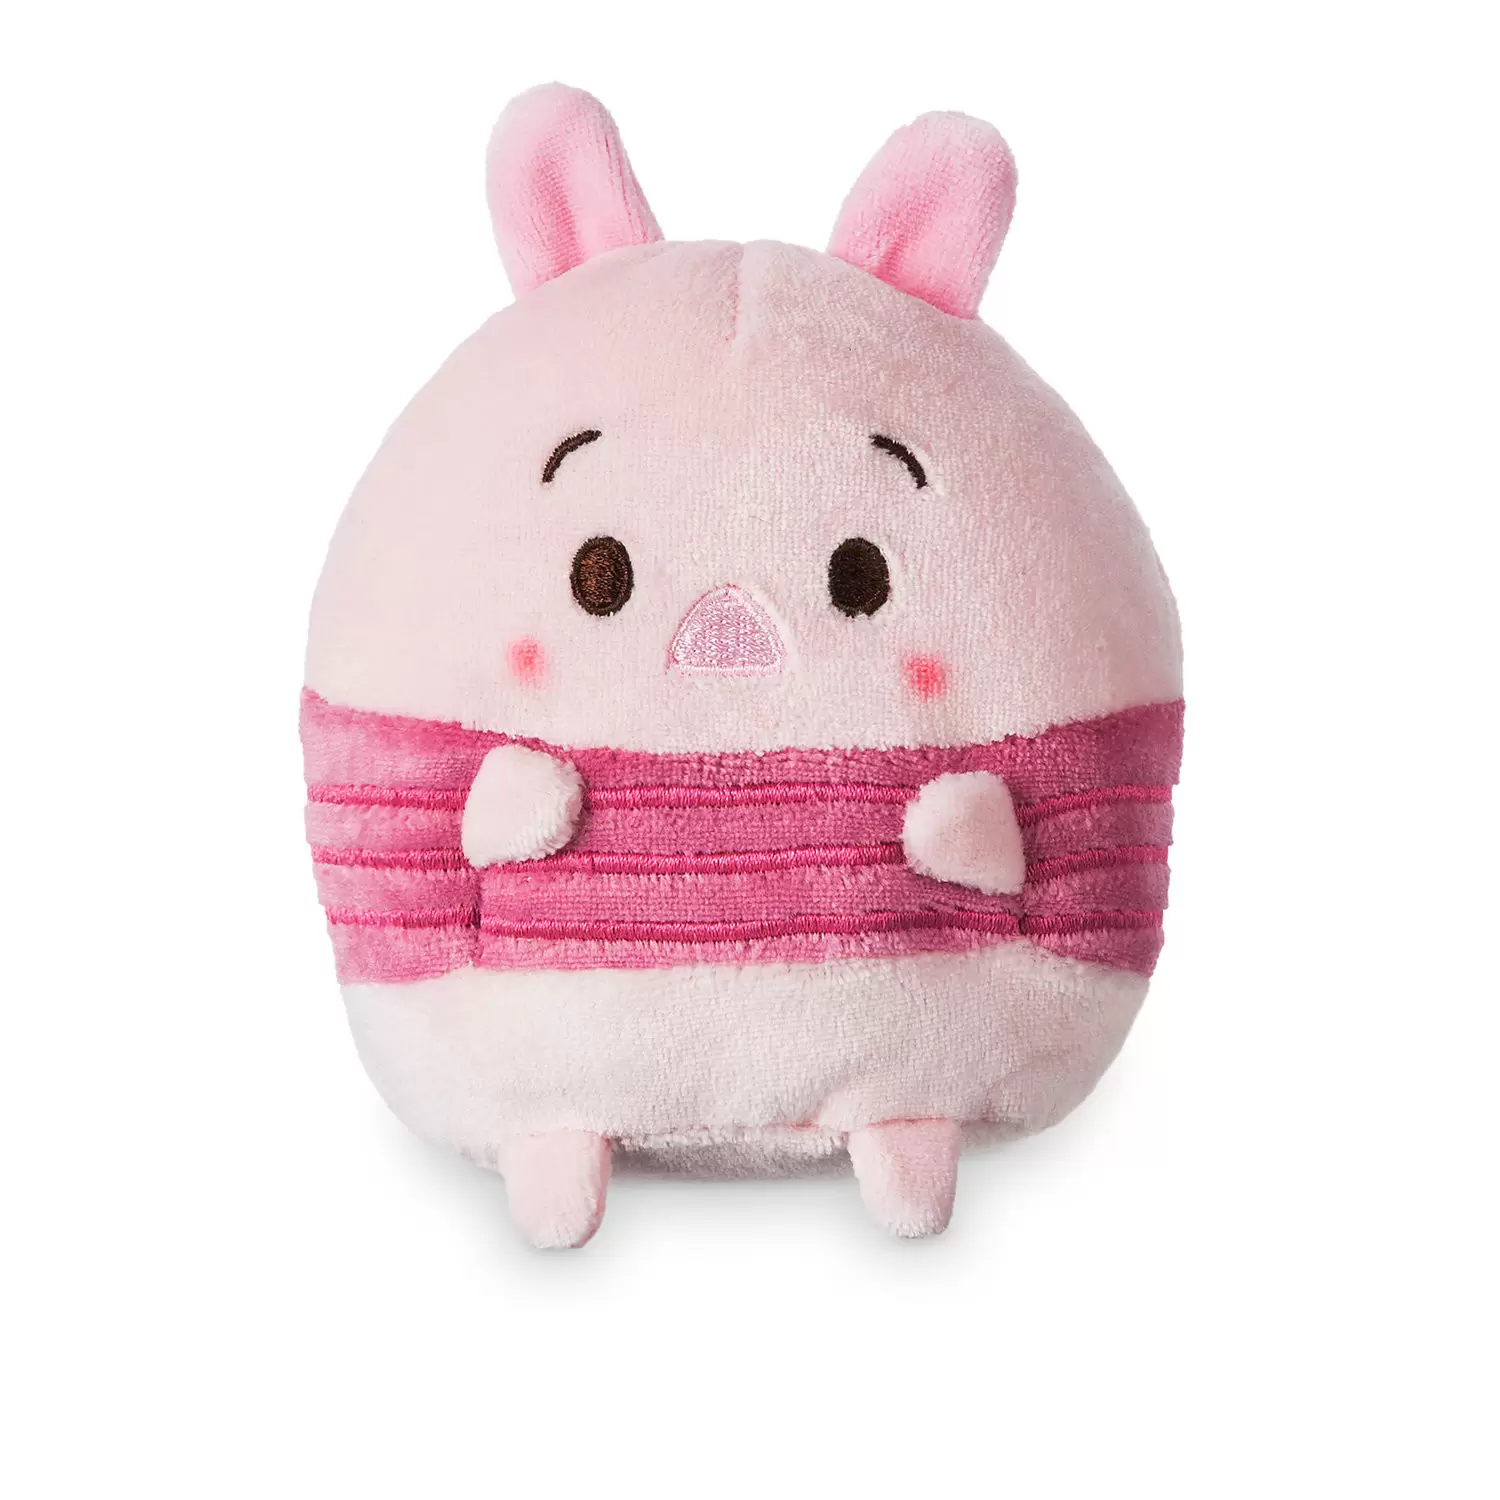 Ufufy Plush - Piglet Scented